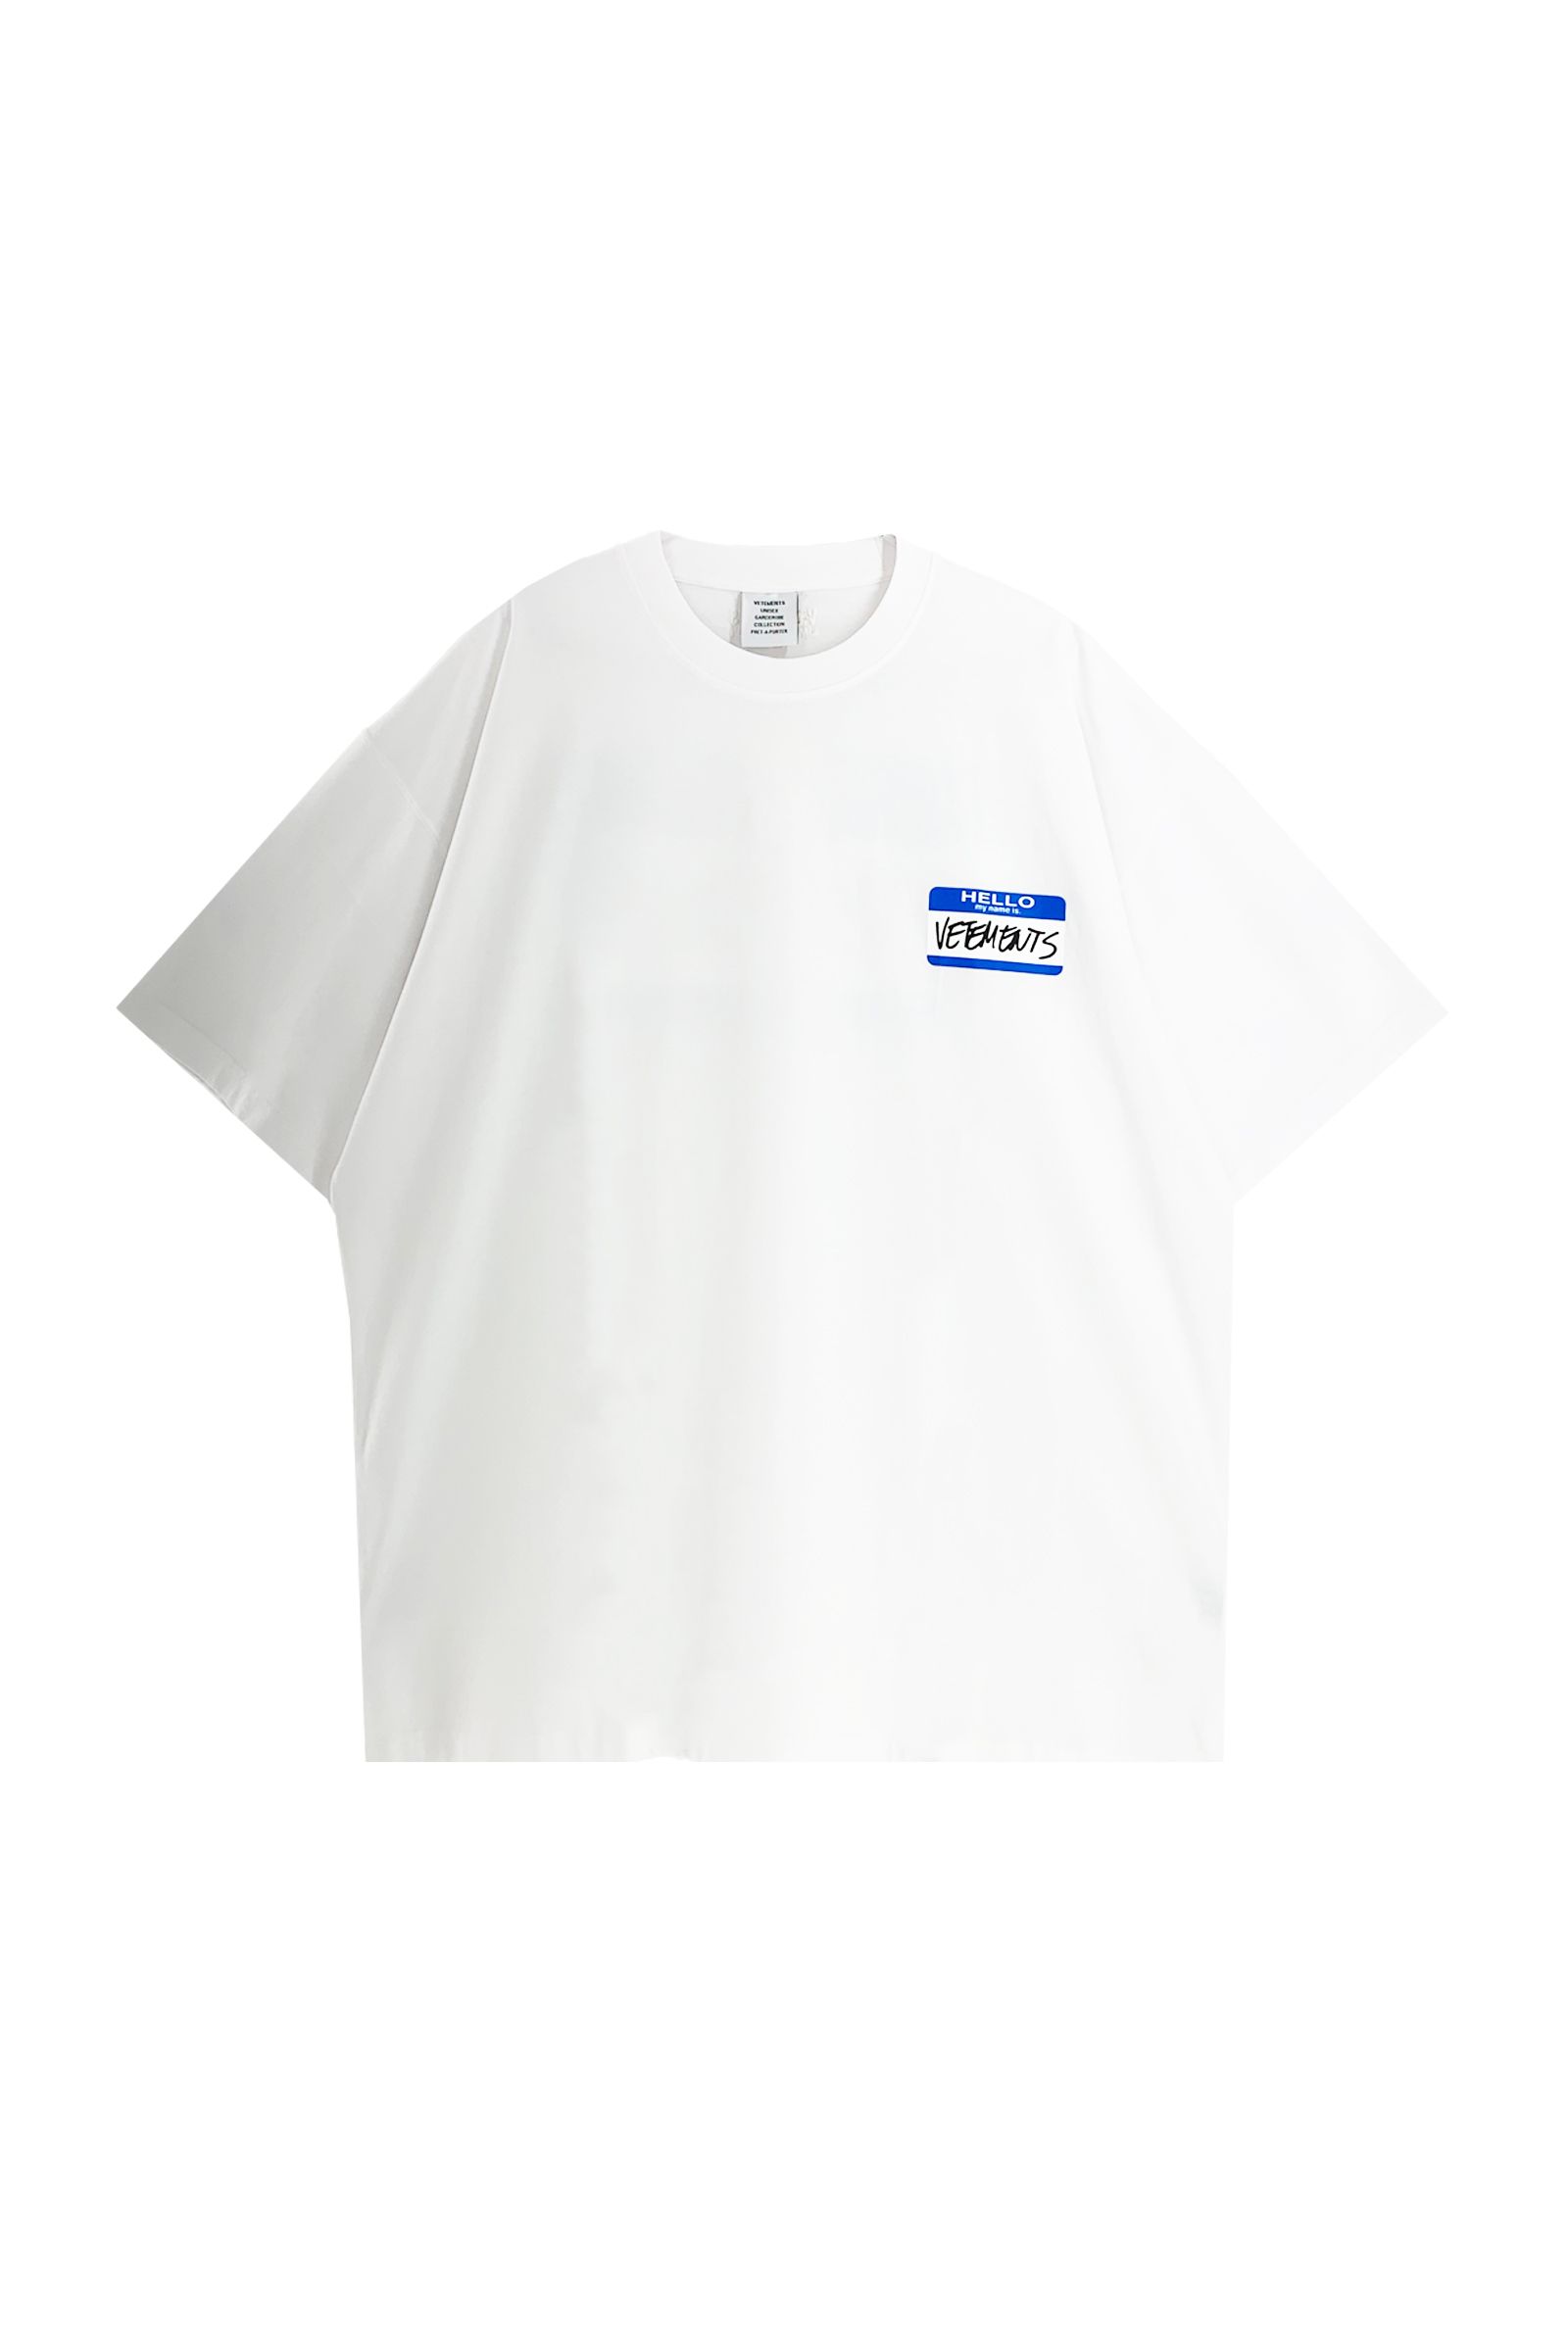 MY NAME IS VETEMENTS T-SHIRT WHITE - XS